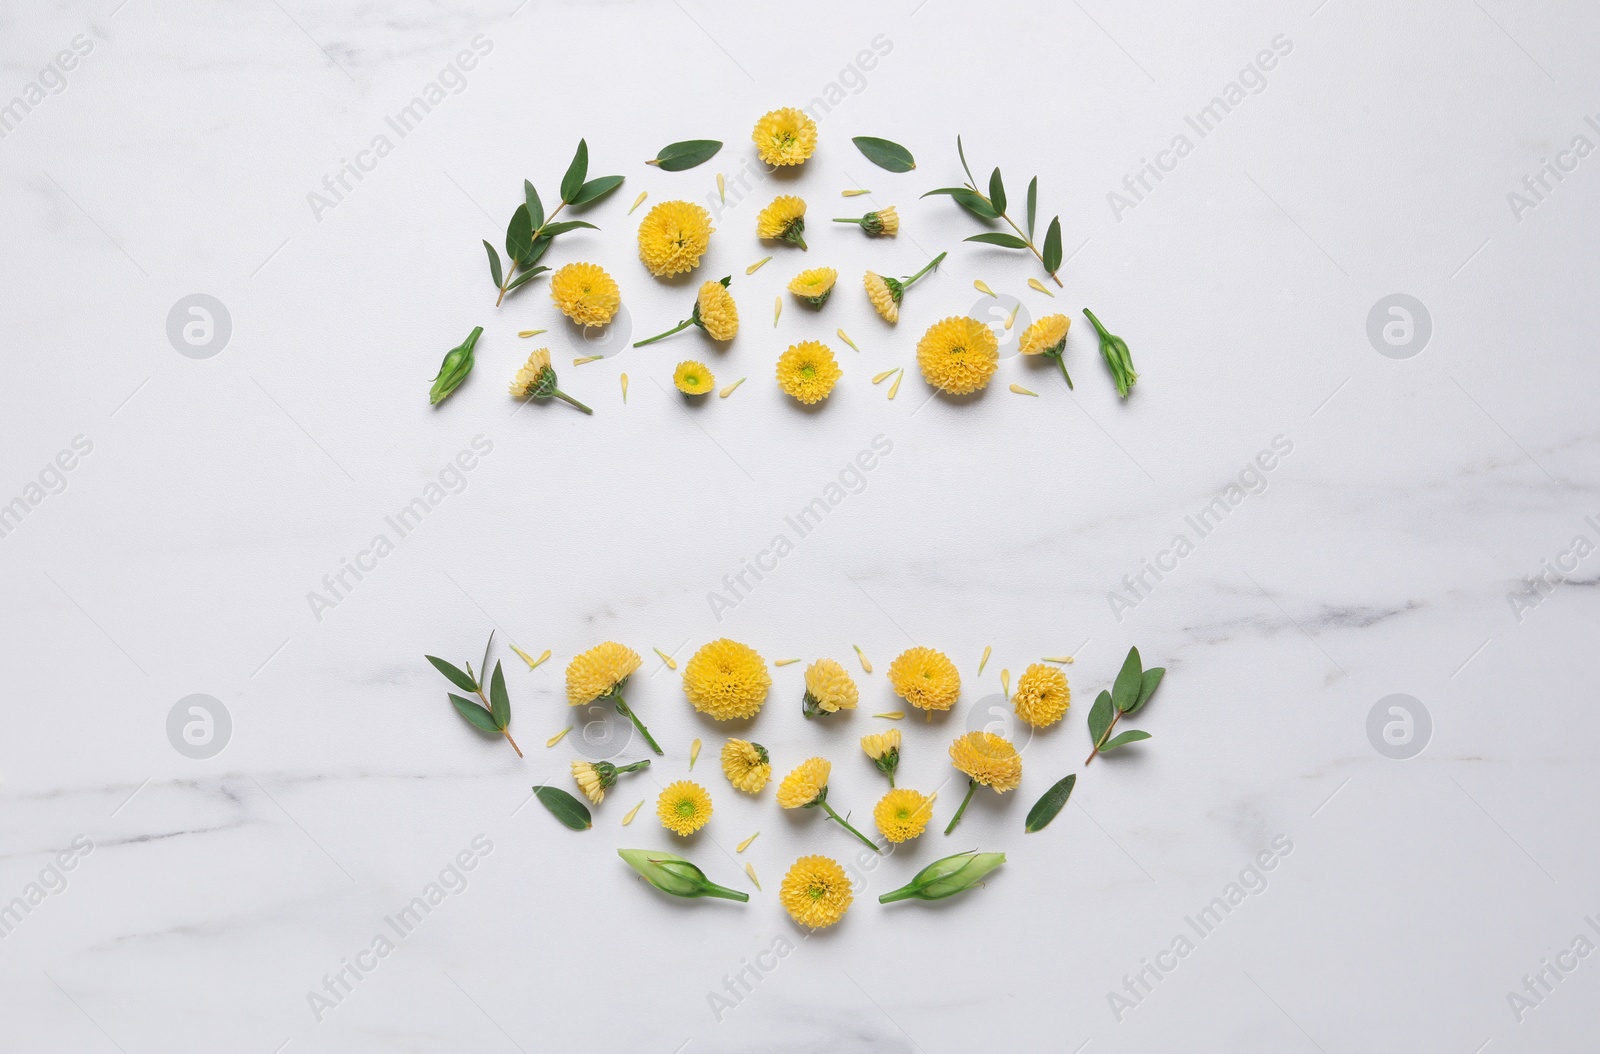 Photo of Wreath made of chrysanthemum flowers and green leaves on white marble background, flat lay. Space for text